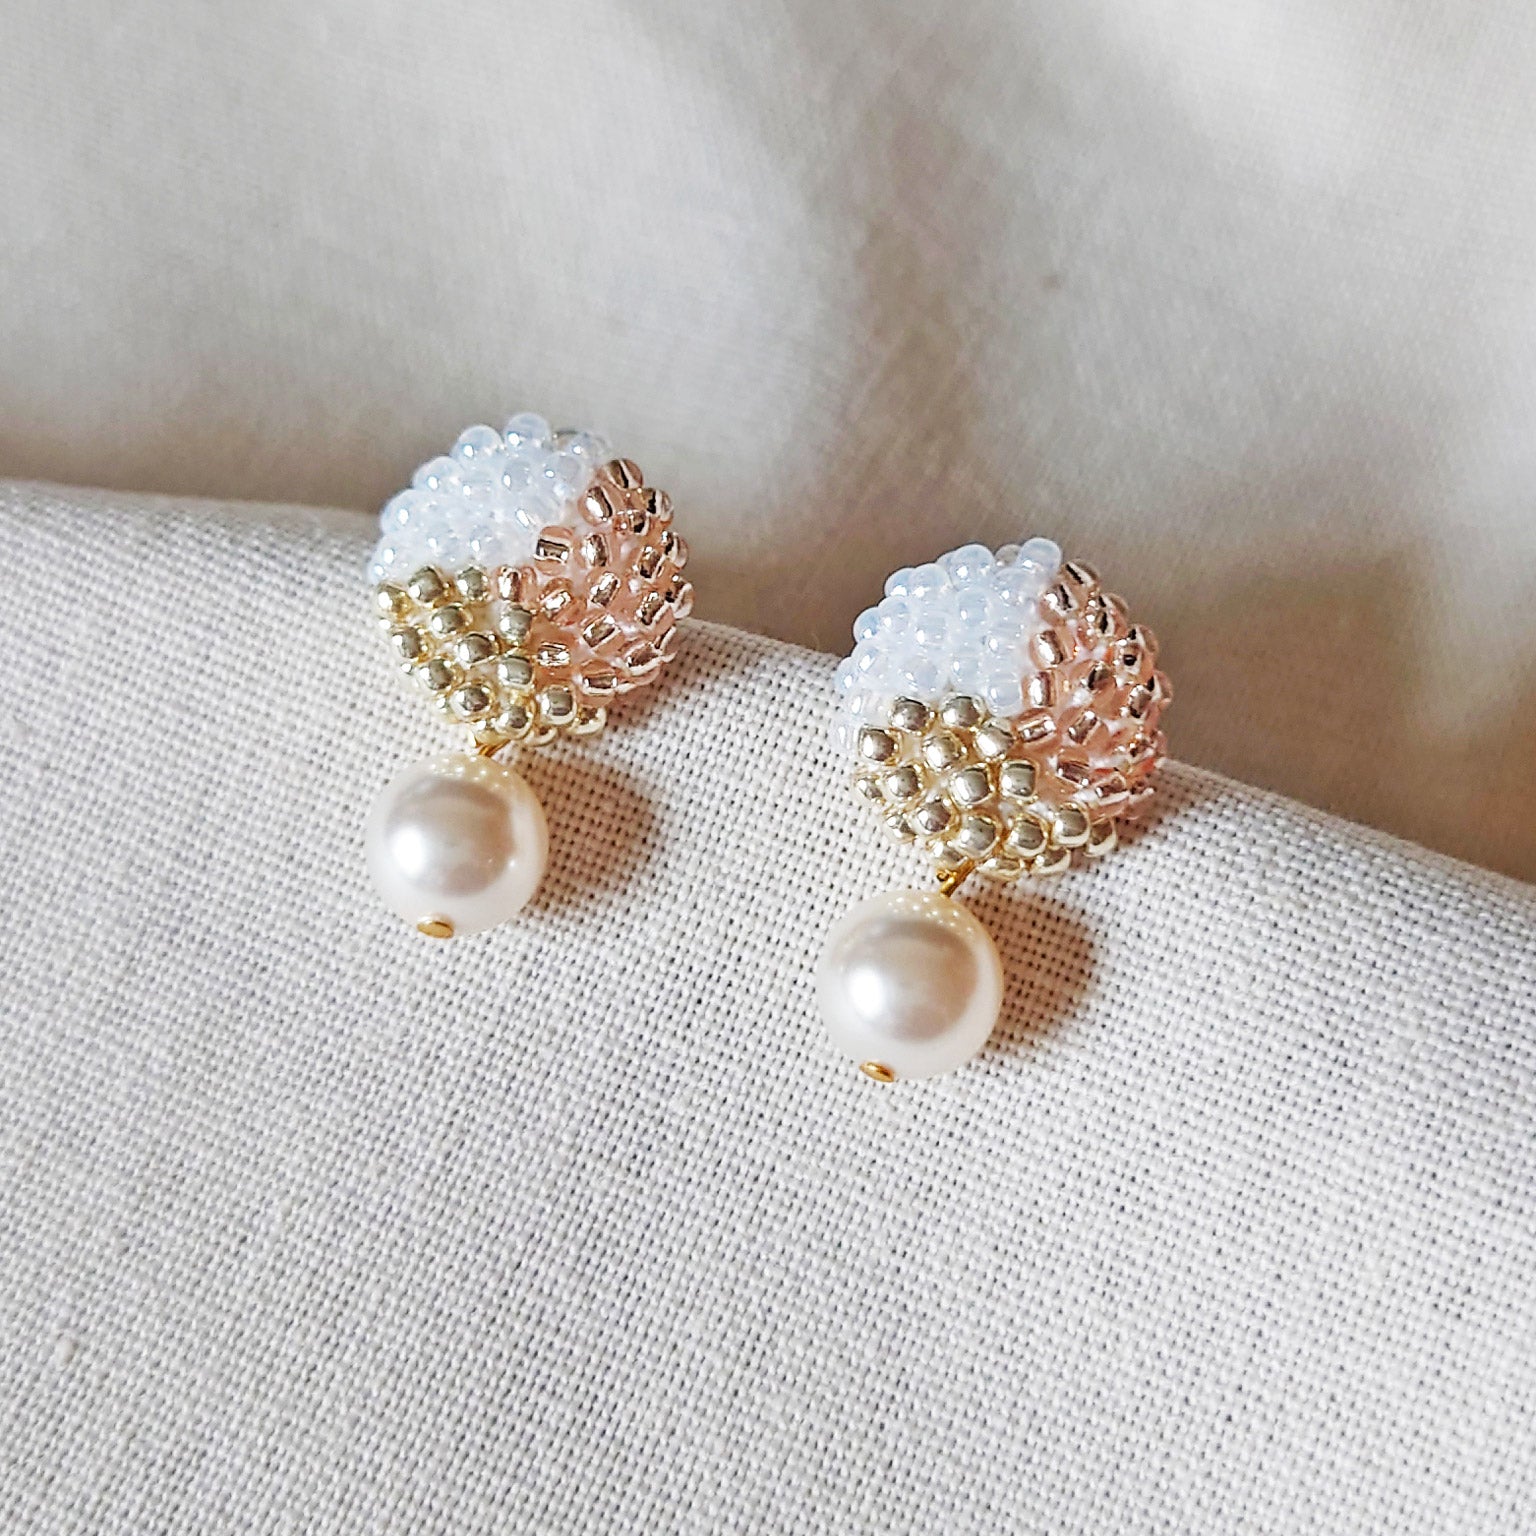 Mariota Trio Earrings in Champagne Pink Front